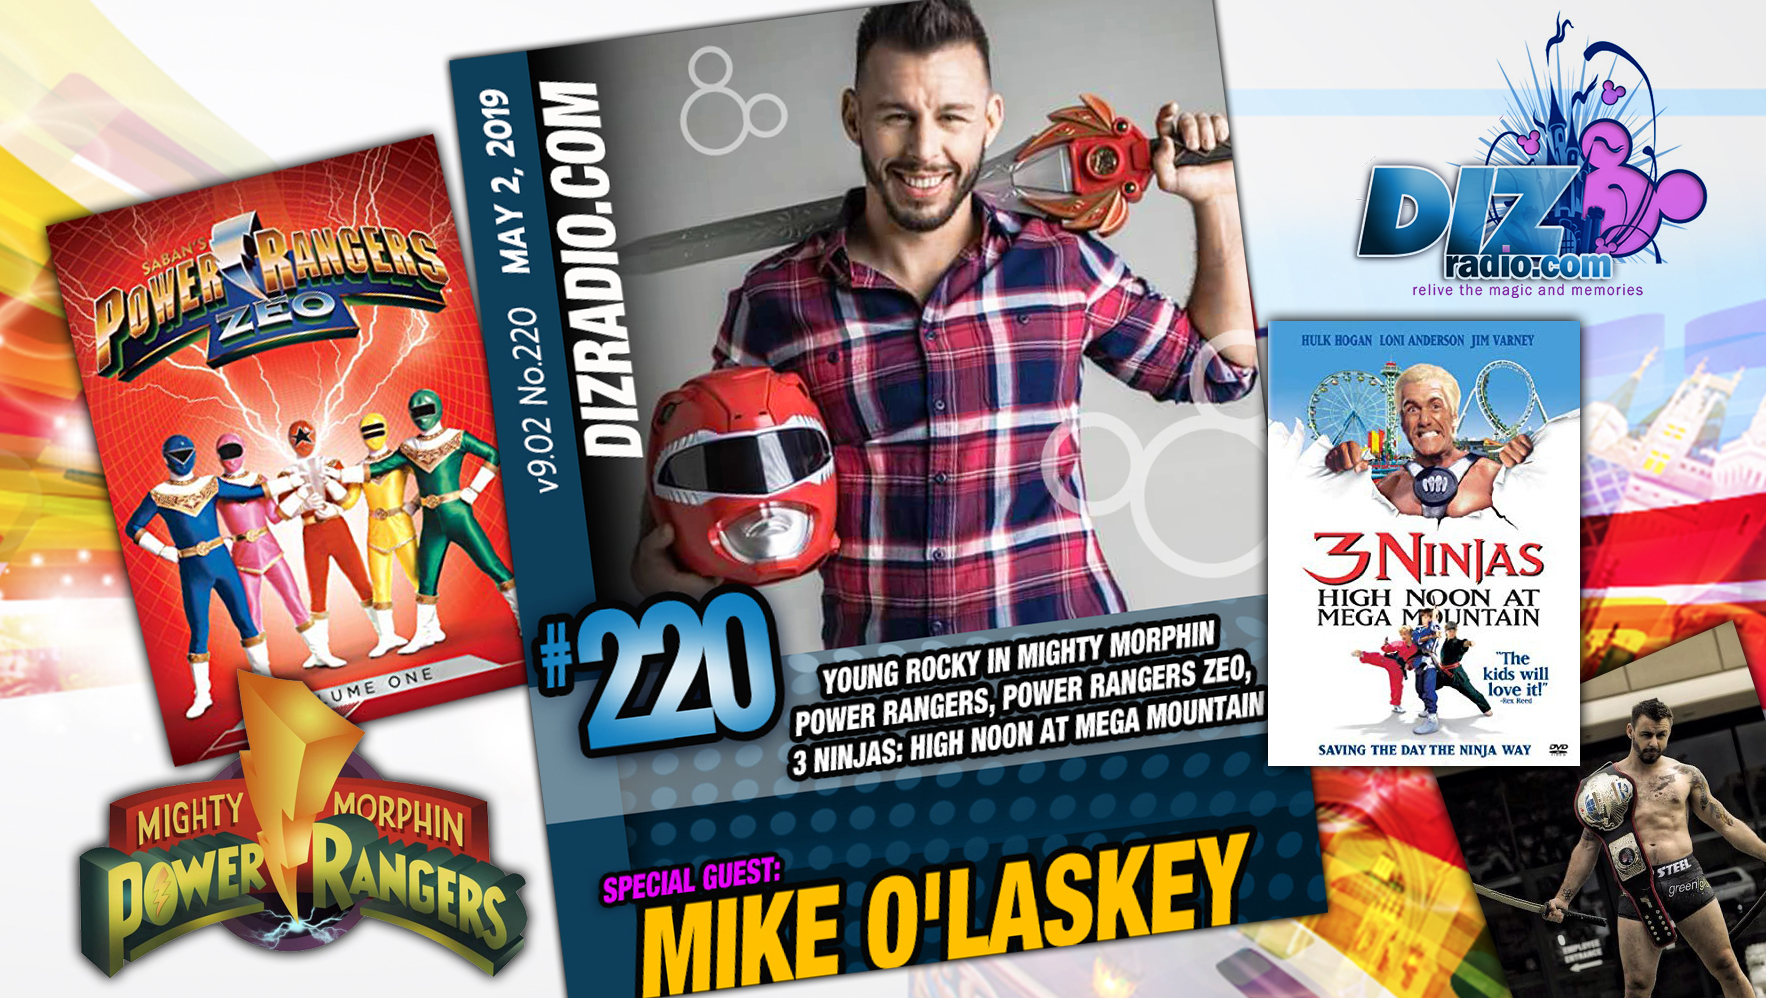 DisneyBlu's DizRadio Show #220 w/ Special Guest Mike O'Laskey (Young Rocky on Power Rangers, Power Rangers Zeo, 3 Ninjas High Noon at Mega Mountain, Martial Artist) to the show!